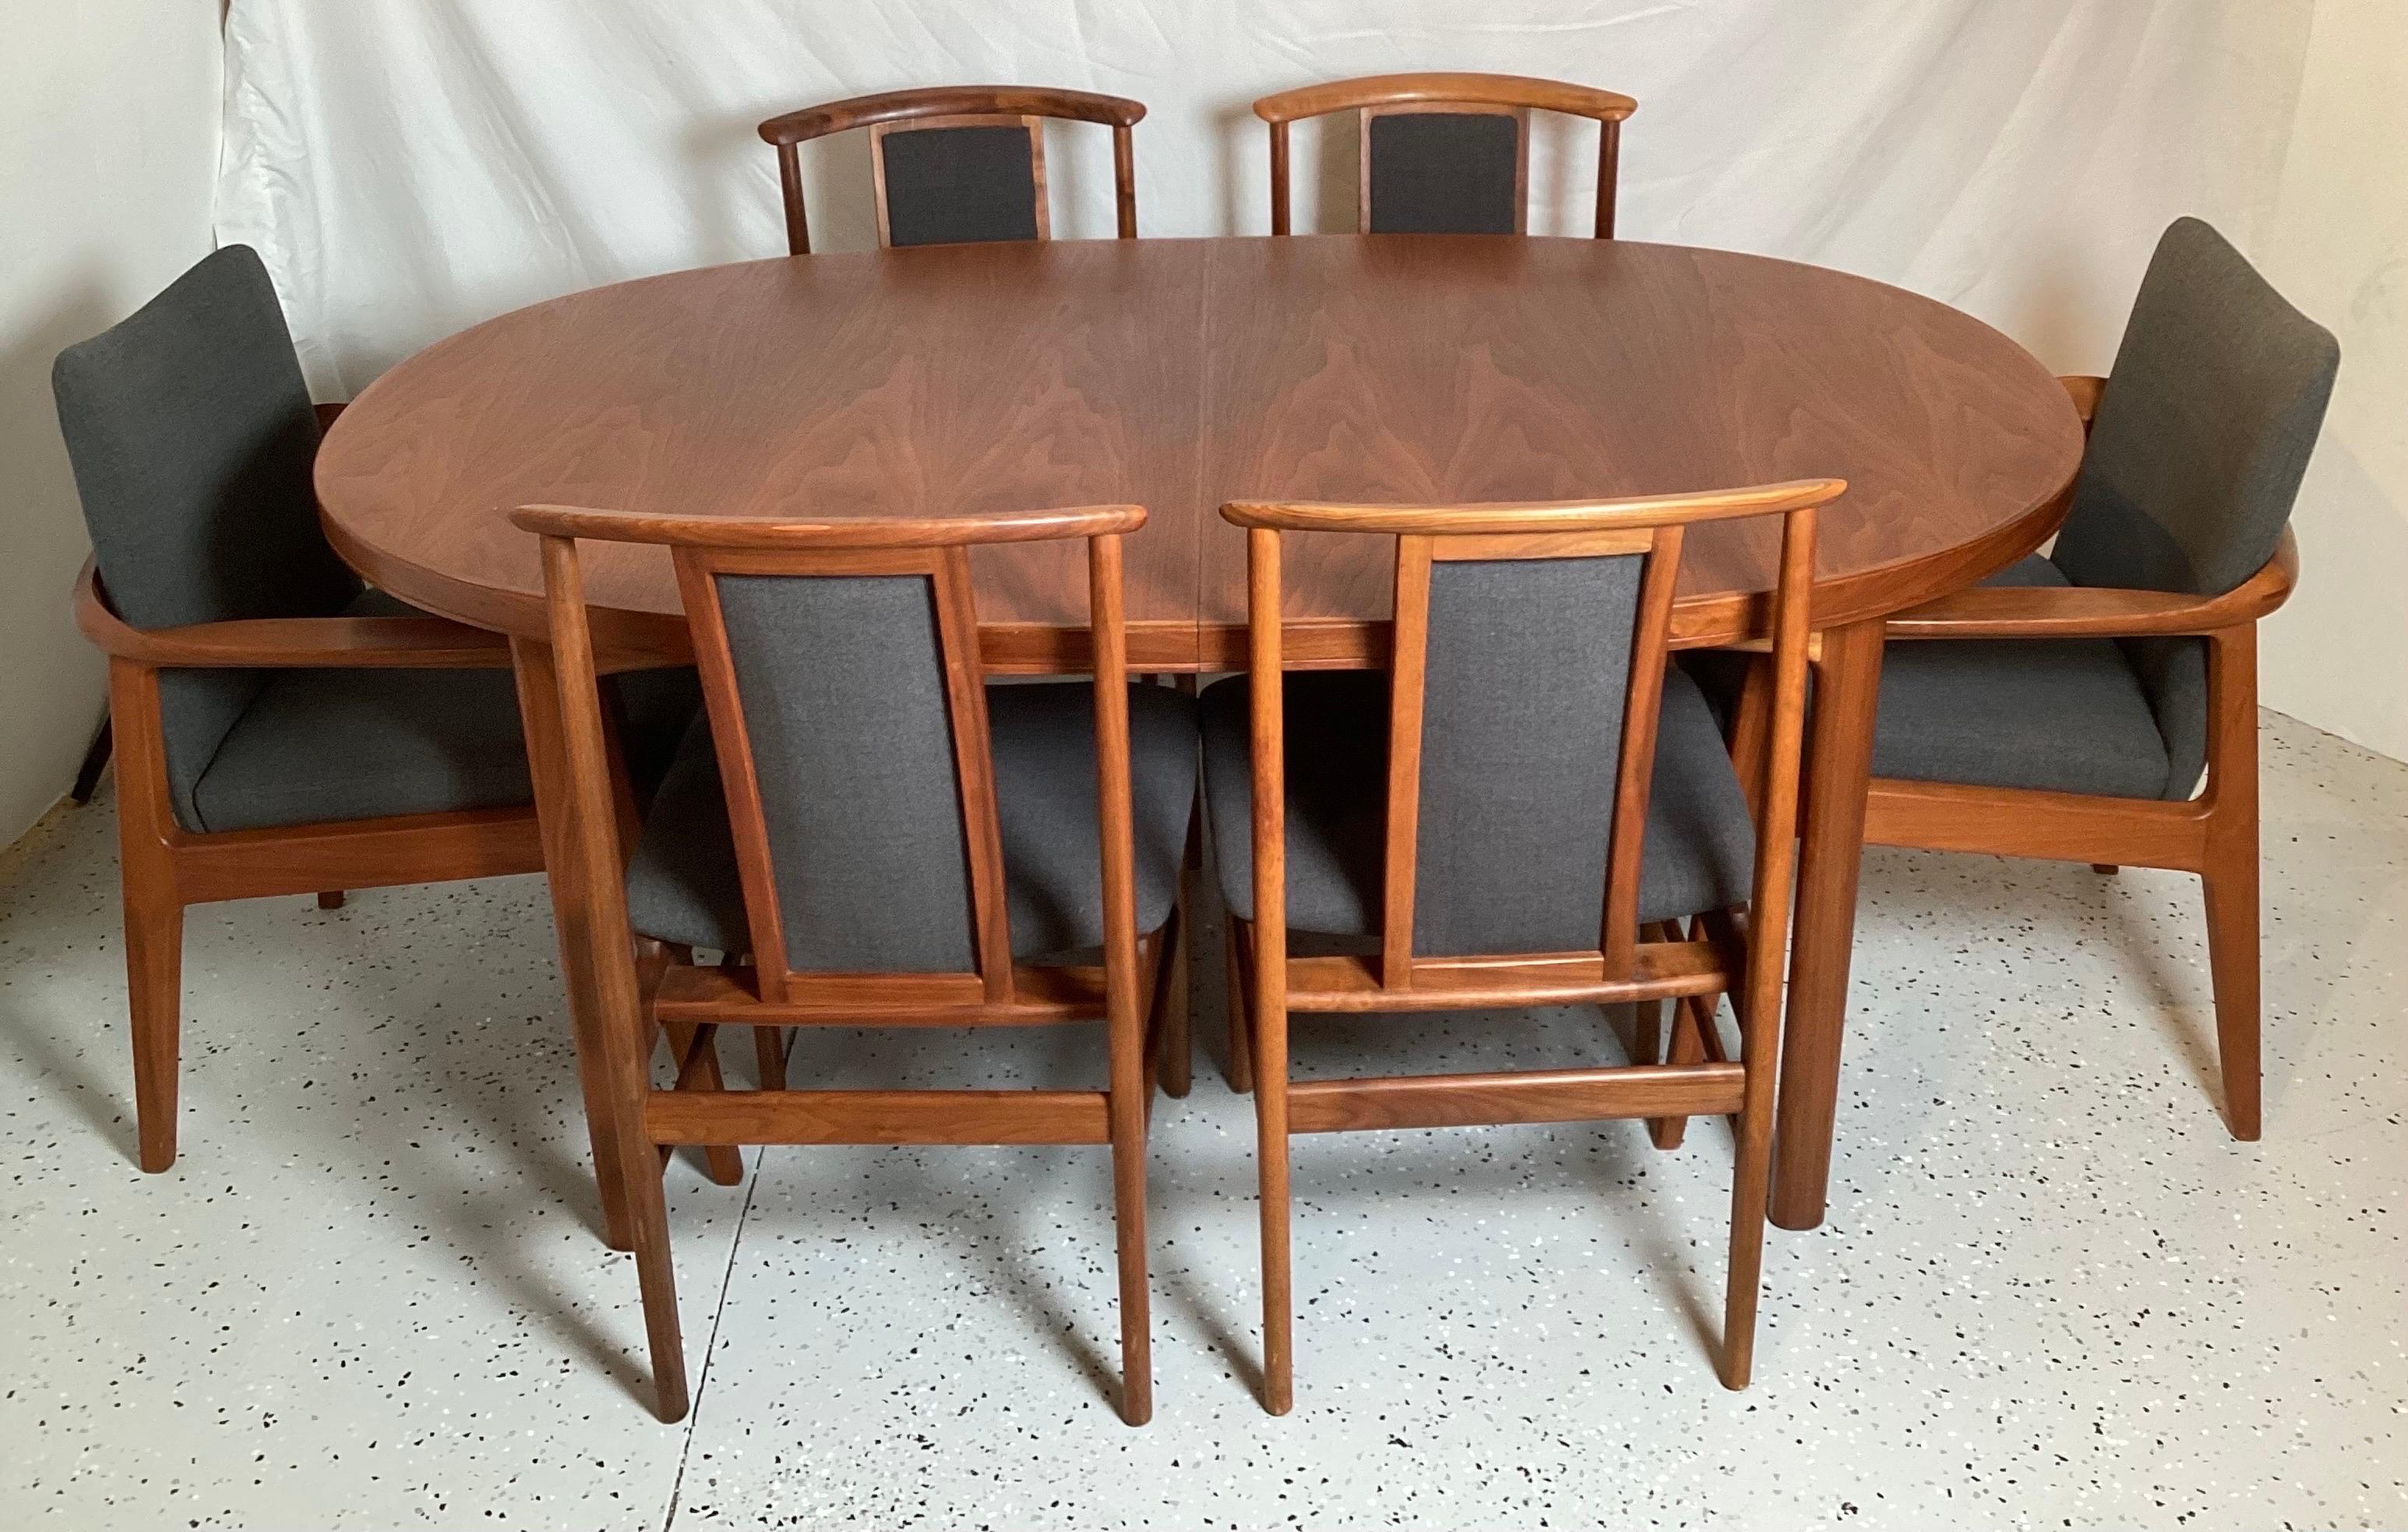 A teak wood dinning set with a table 65 by 41.75 with 2, 18 inch leaves, two arm chairs, 2 side chairs. Great medium size and well cared for condition.